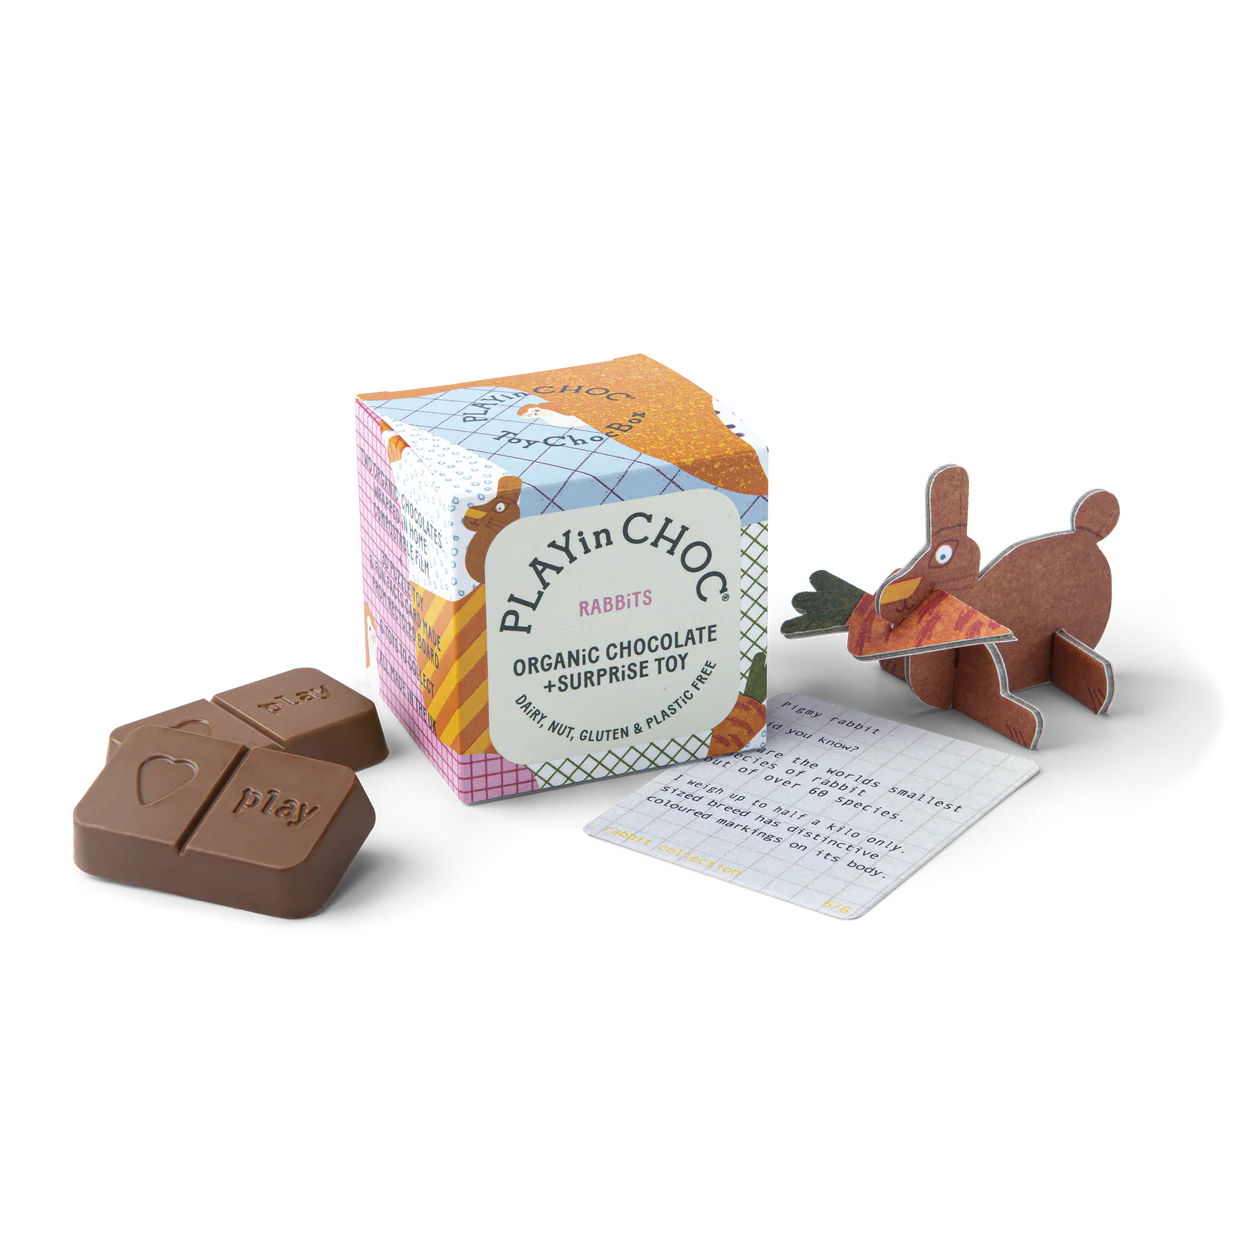 Organic Chocolate + Toy Gift Box - Rabbits - Little Reef and Friends